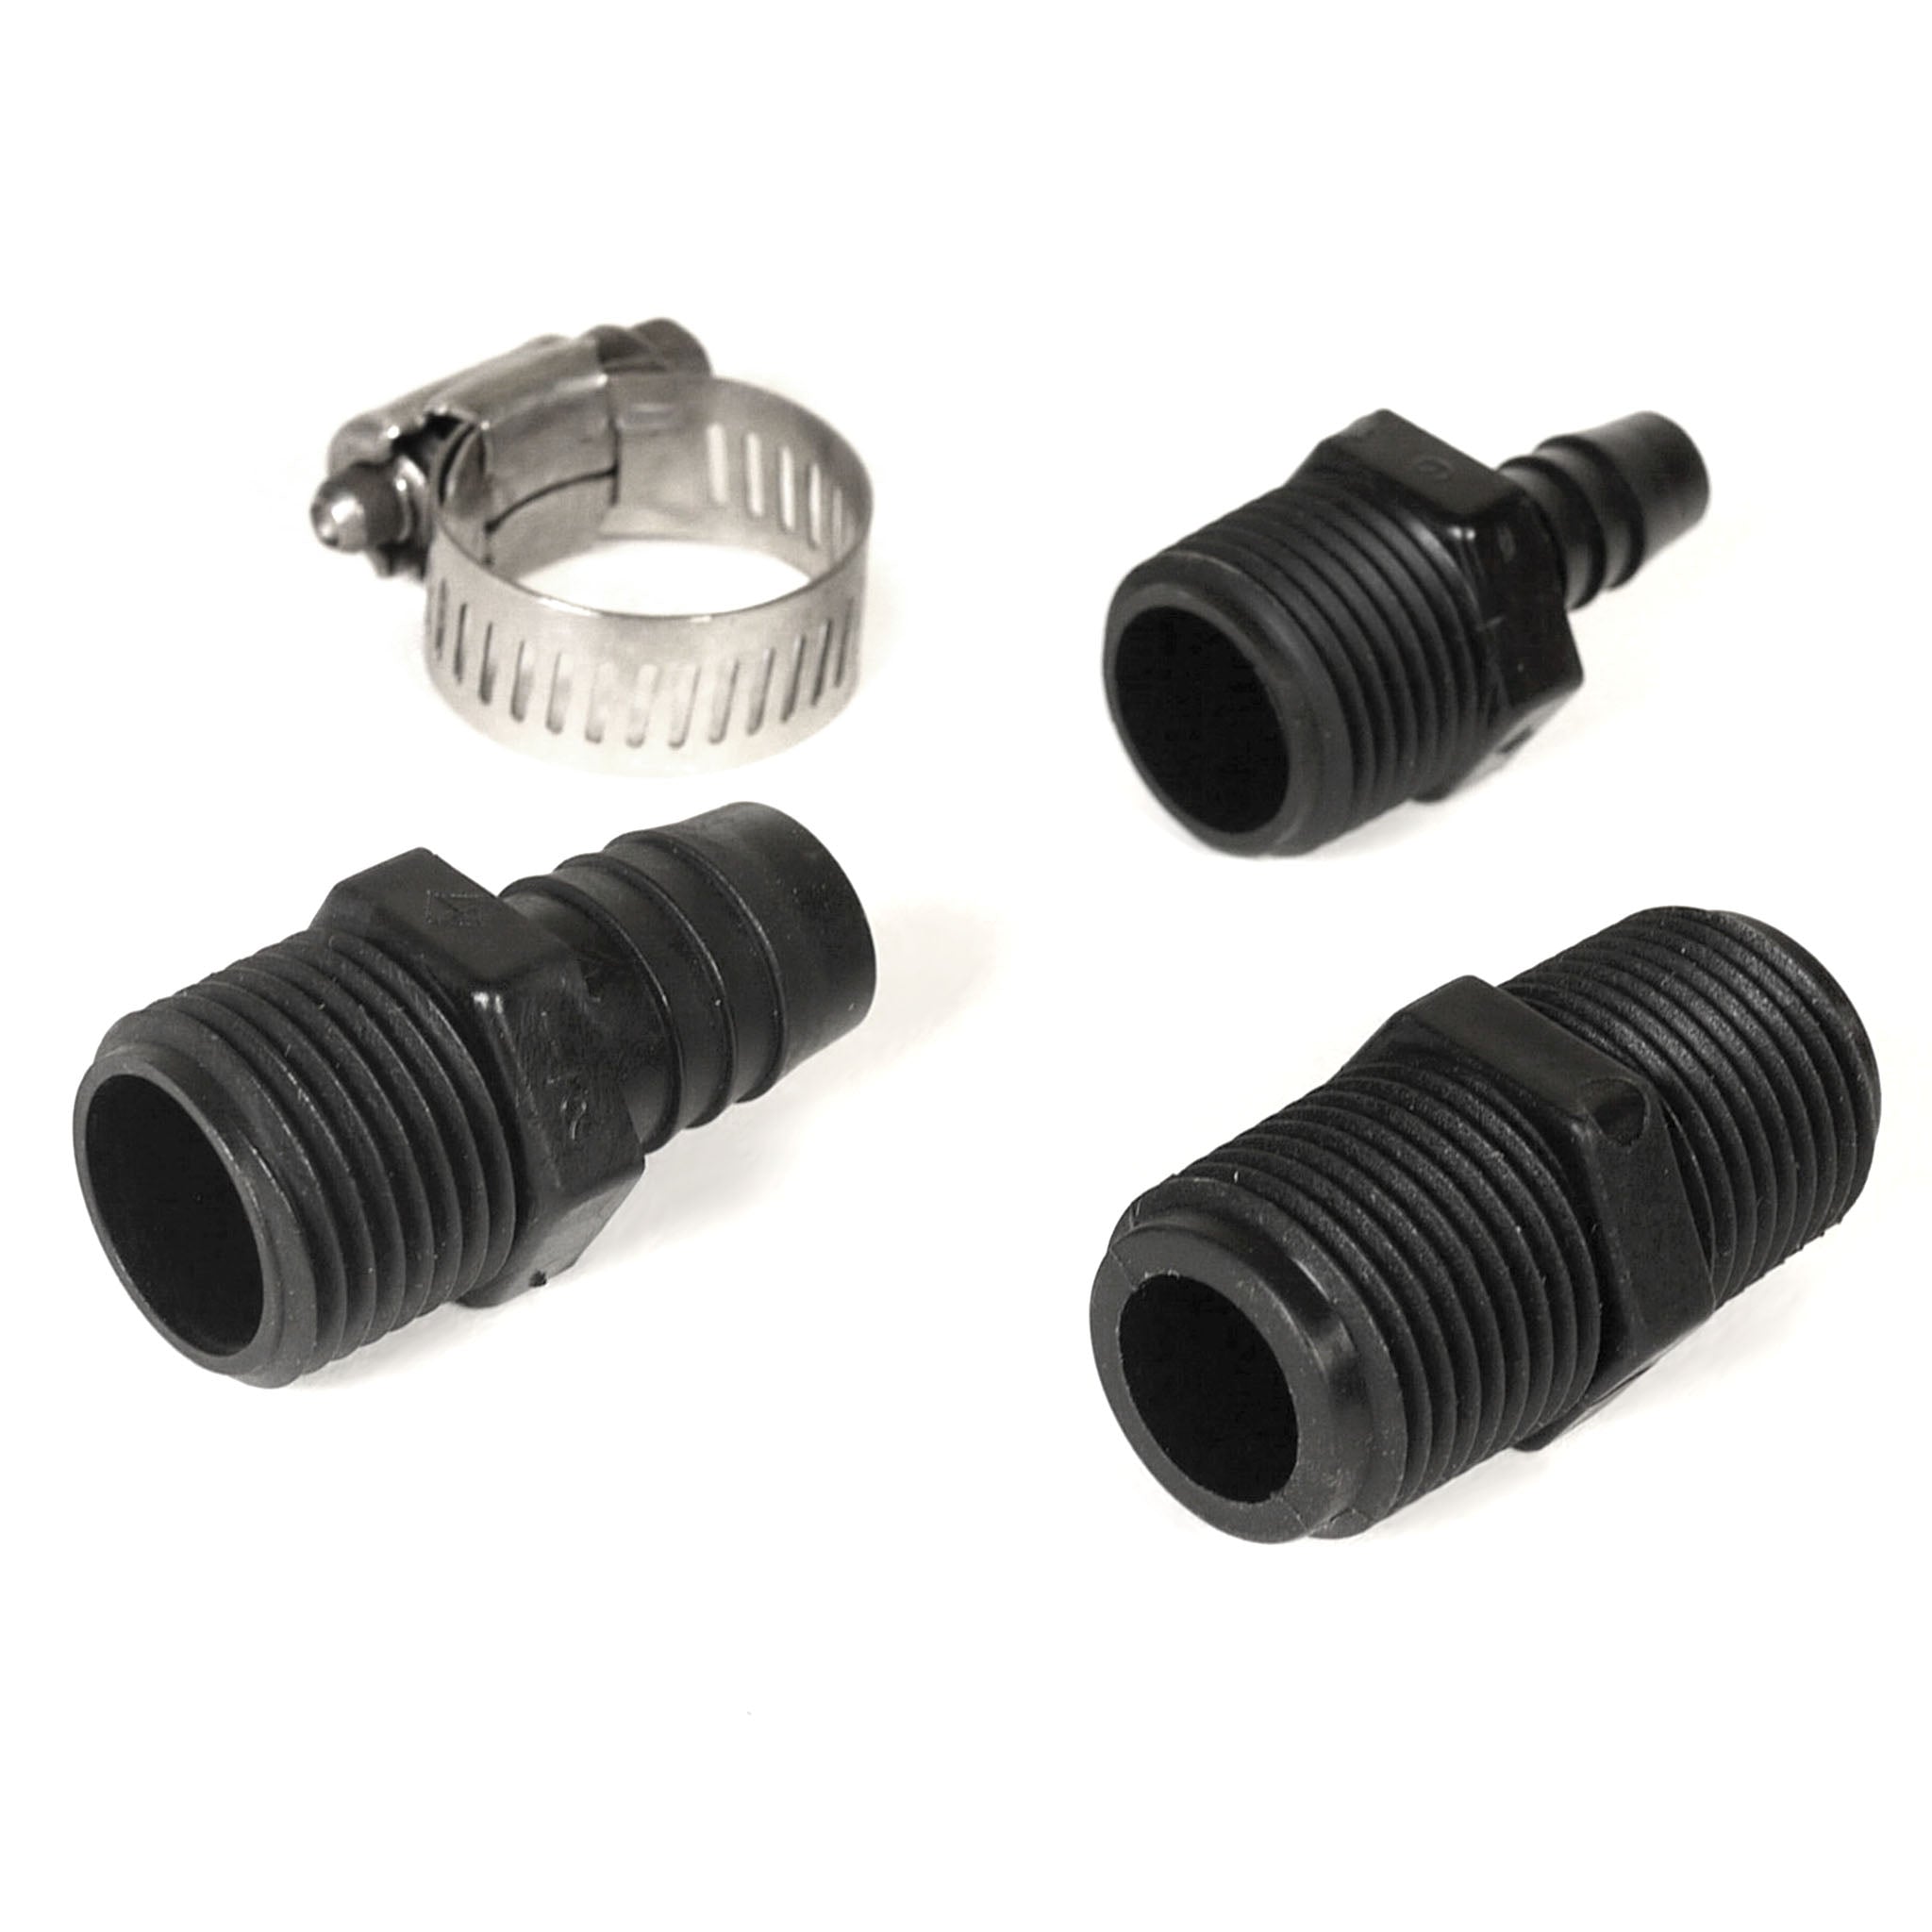 MixAir Universal Diffuser Connector Kit